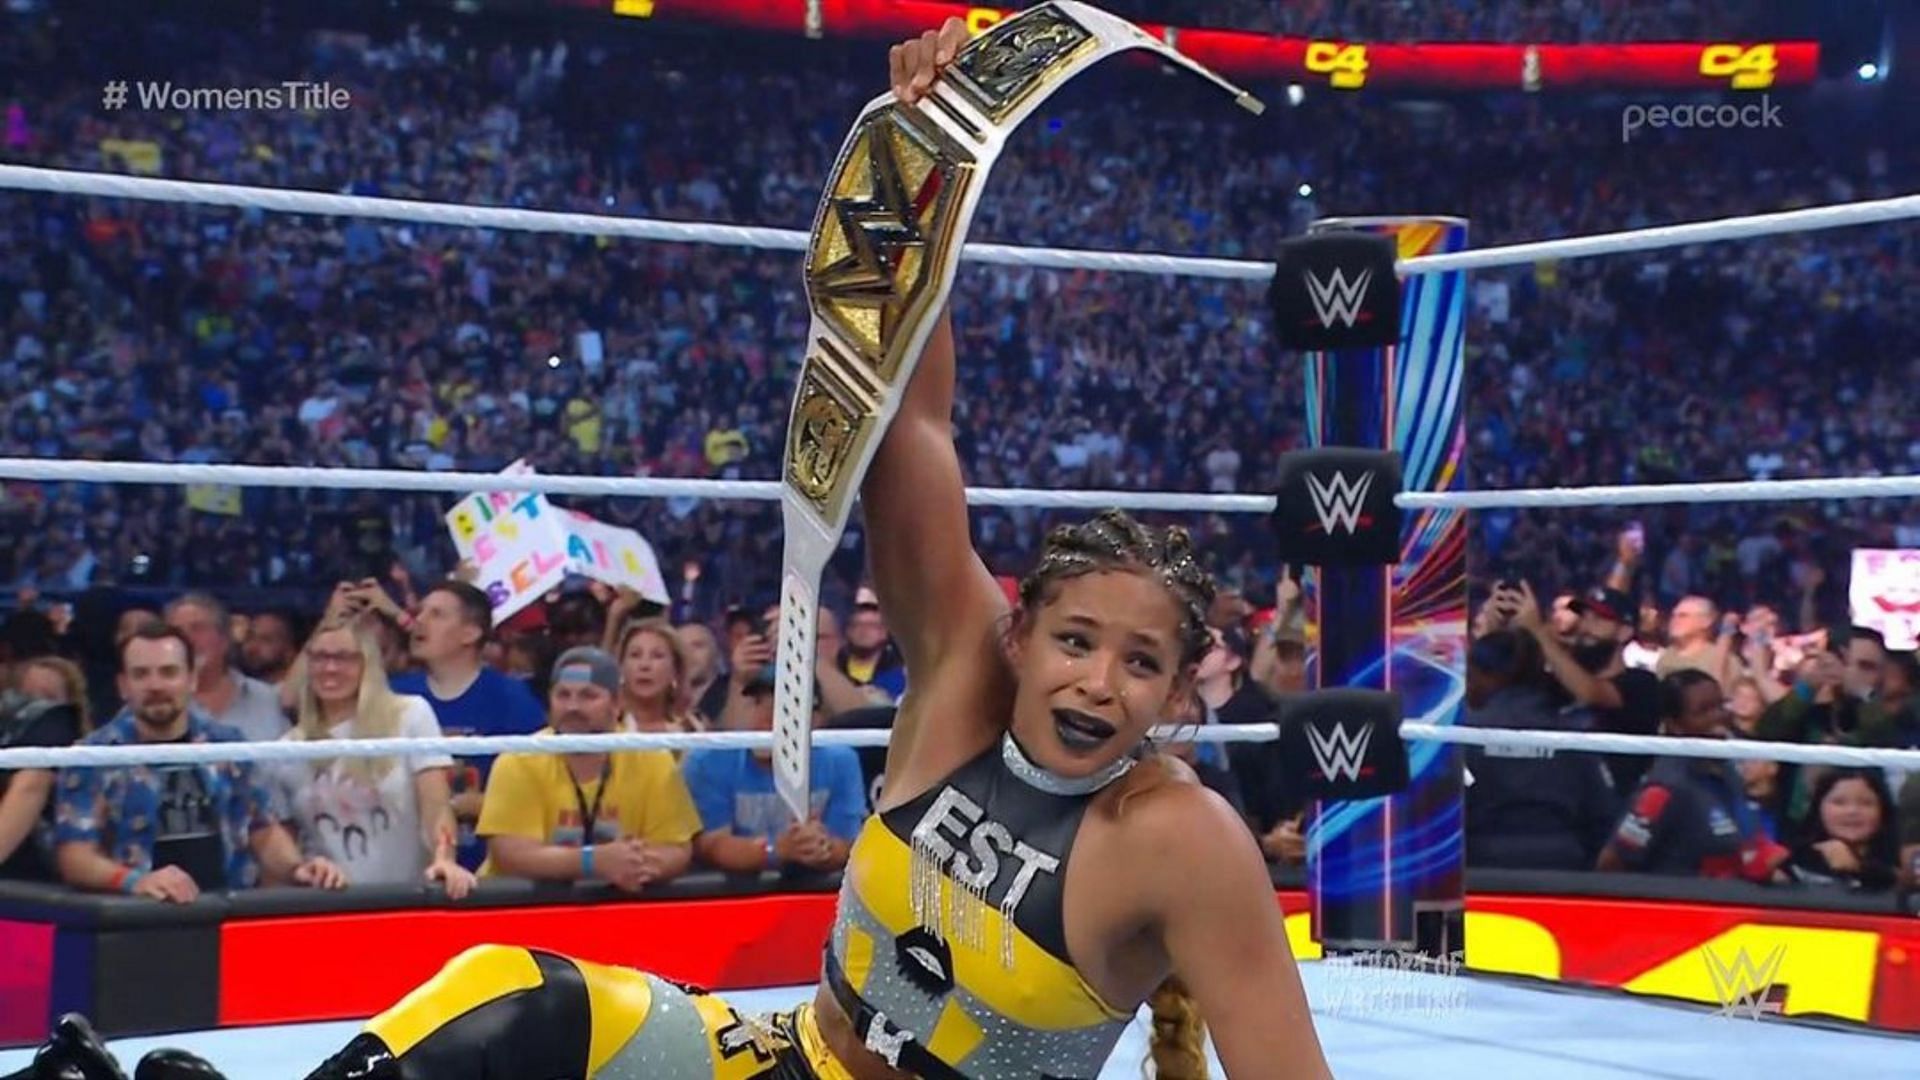 Bianca Belair won and lost the WWE Women